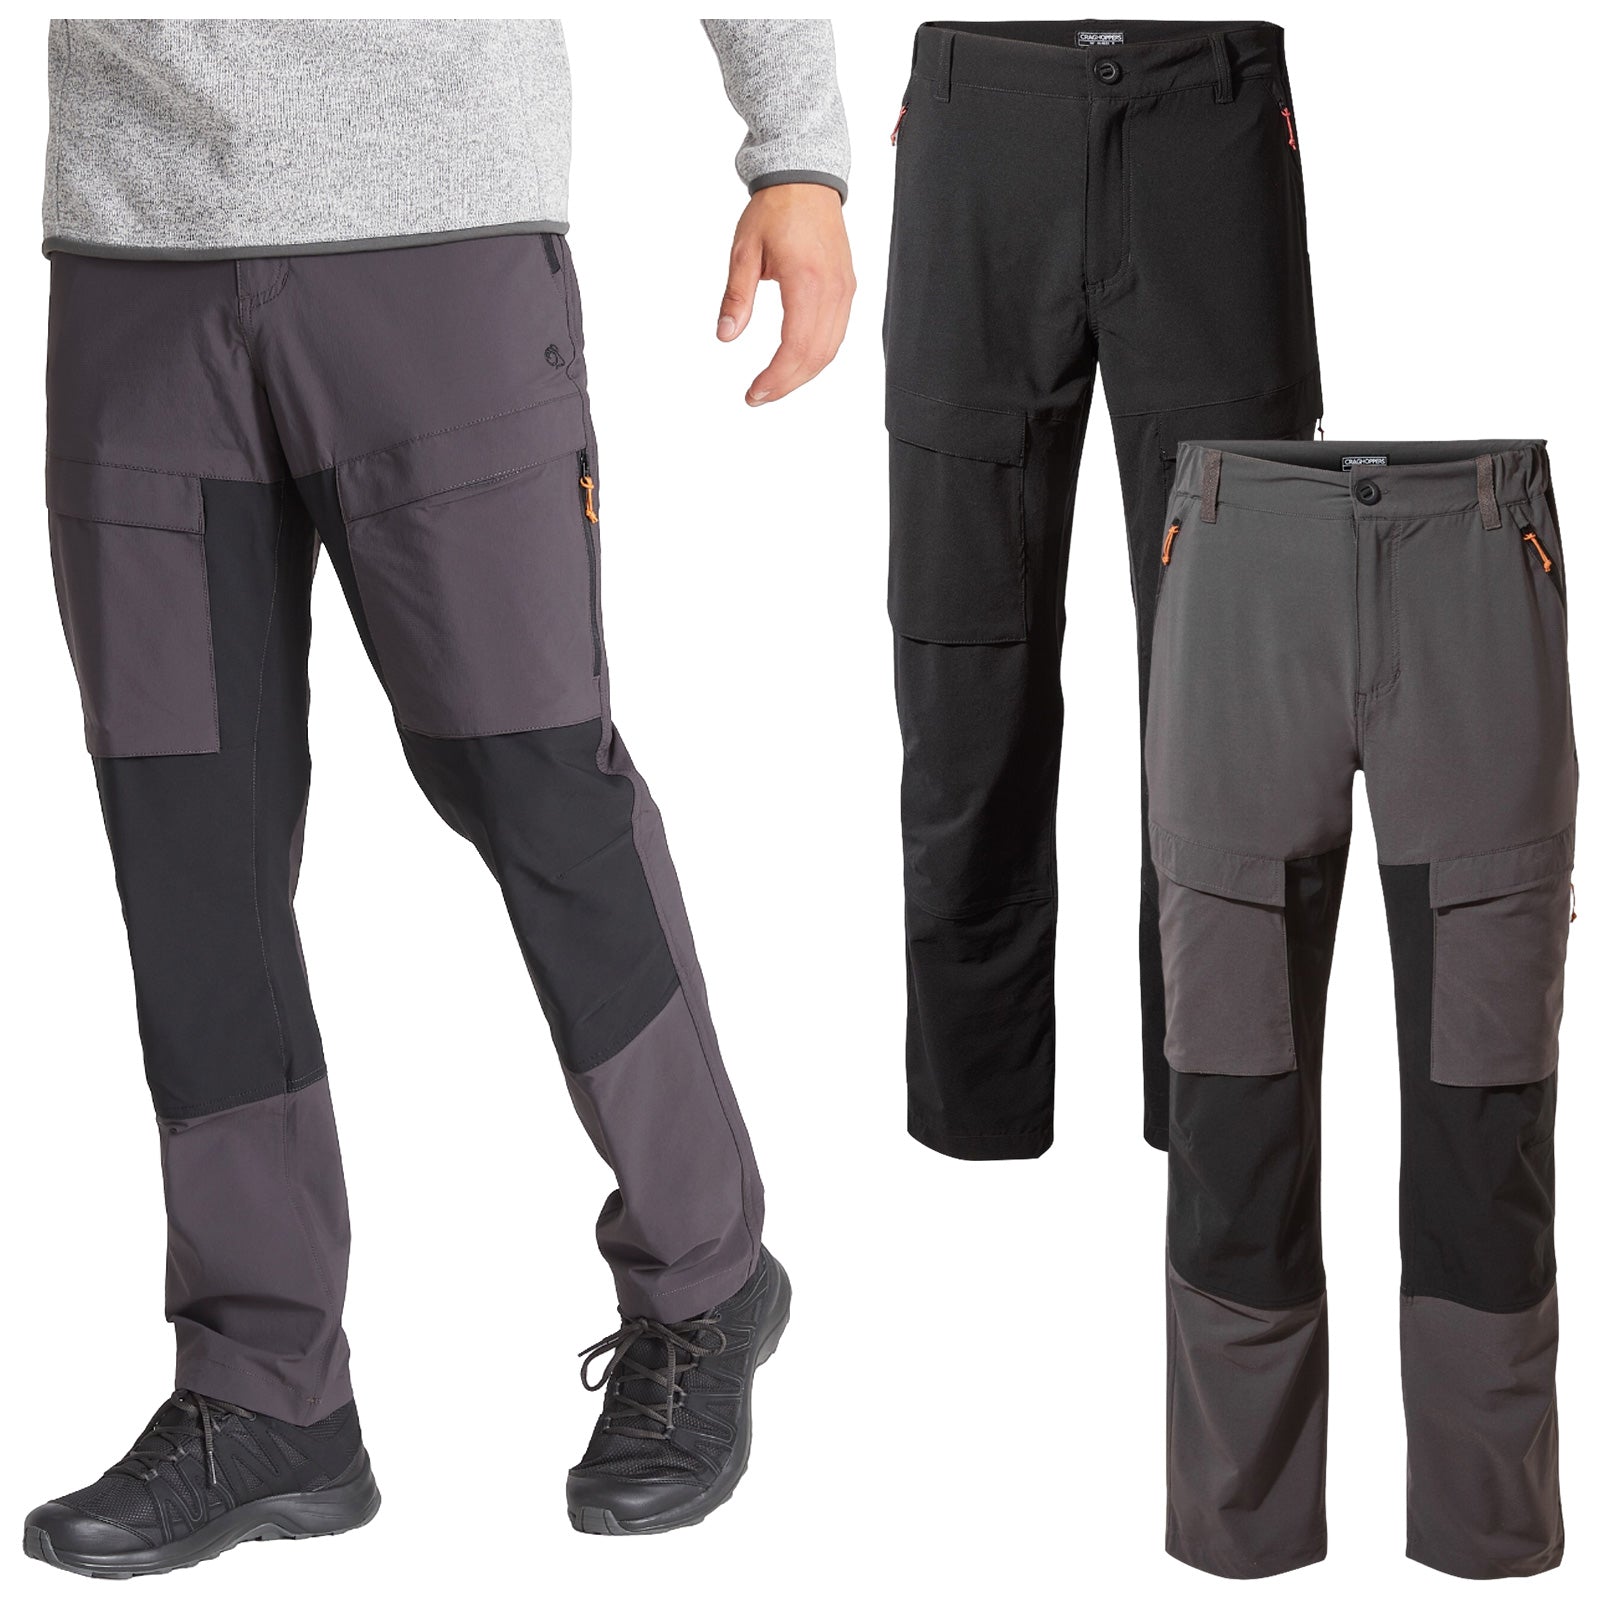 Craghoppers Mens Kiwi Pro Expedition Trousers